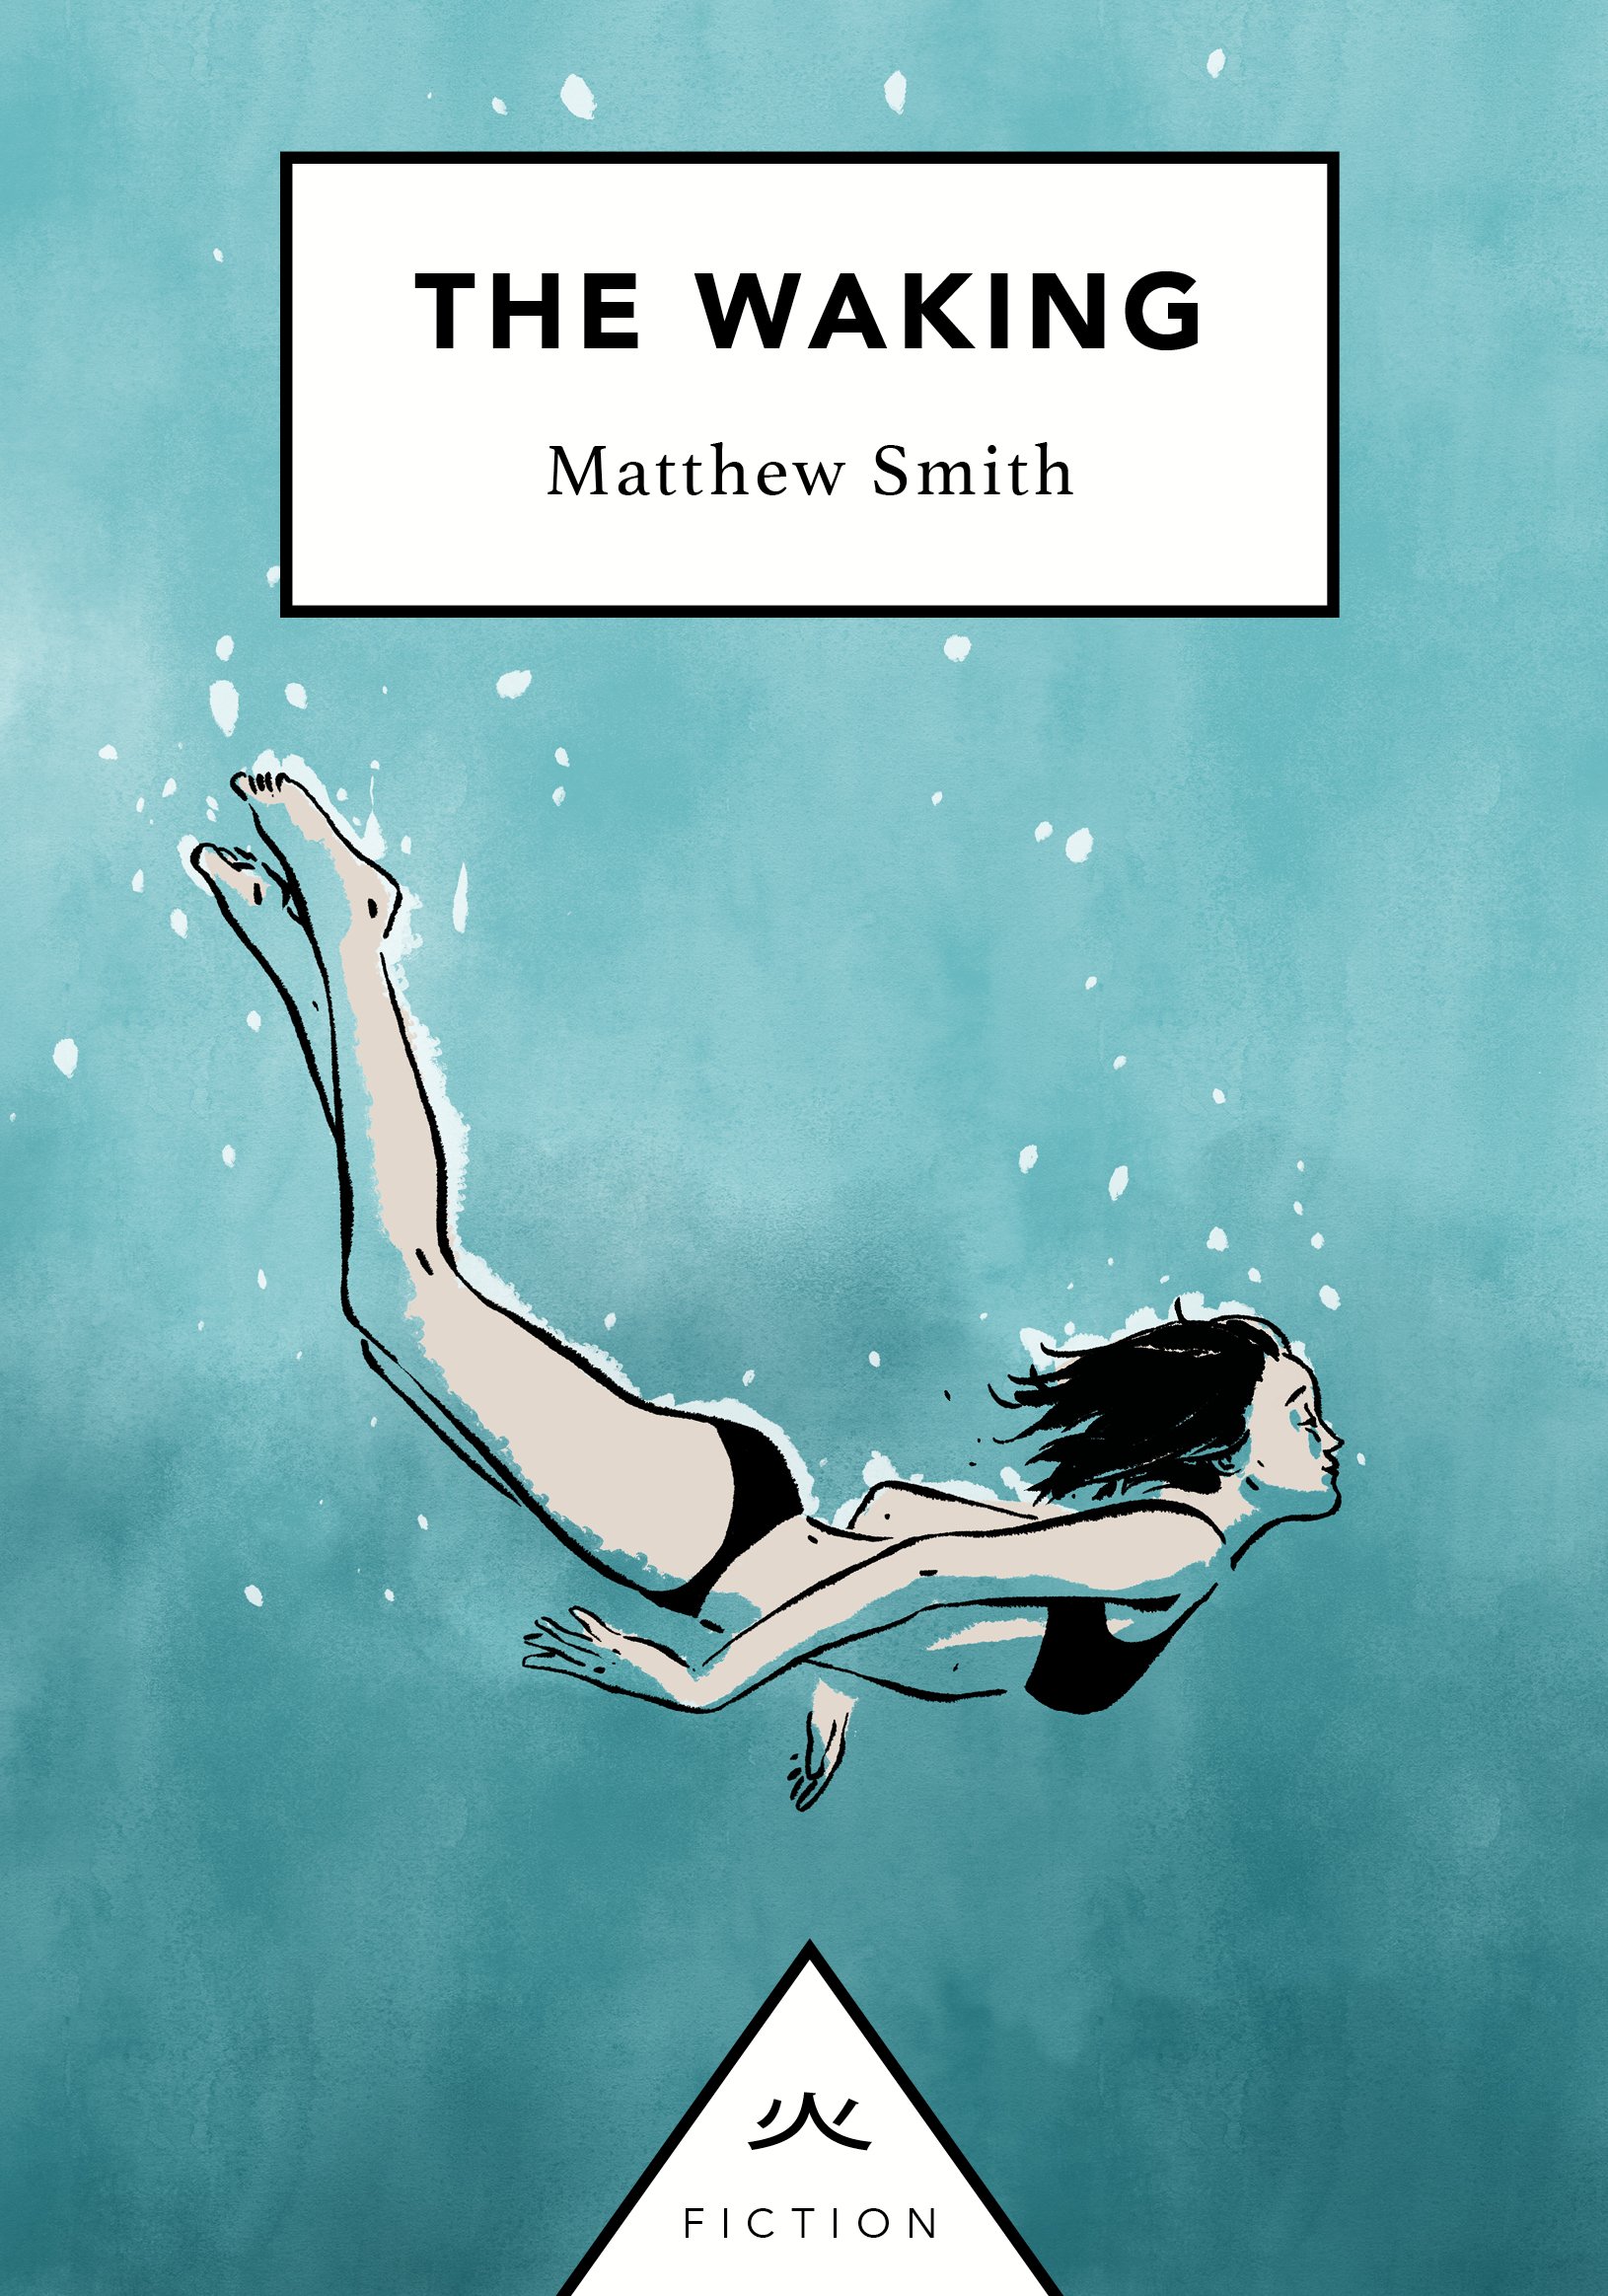 The Waking by Matthew Smith